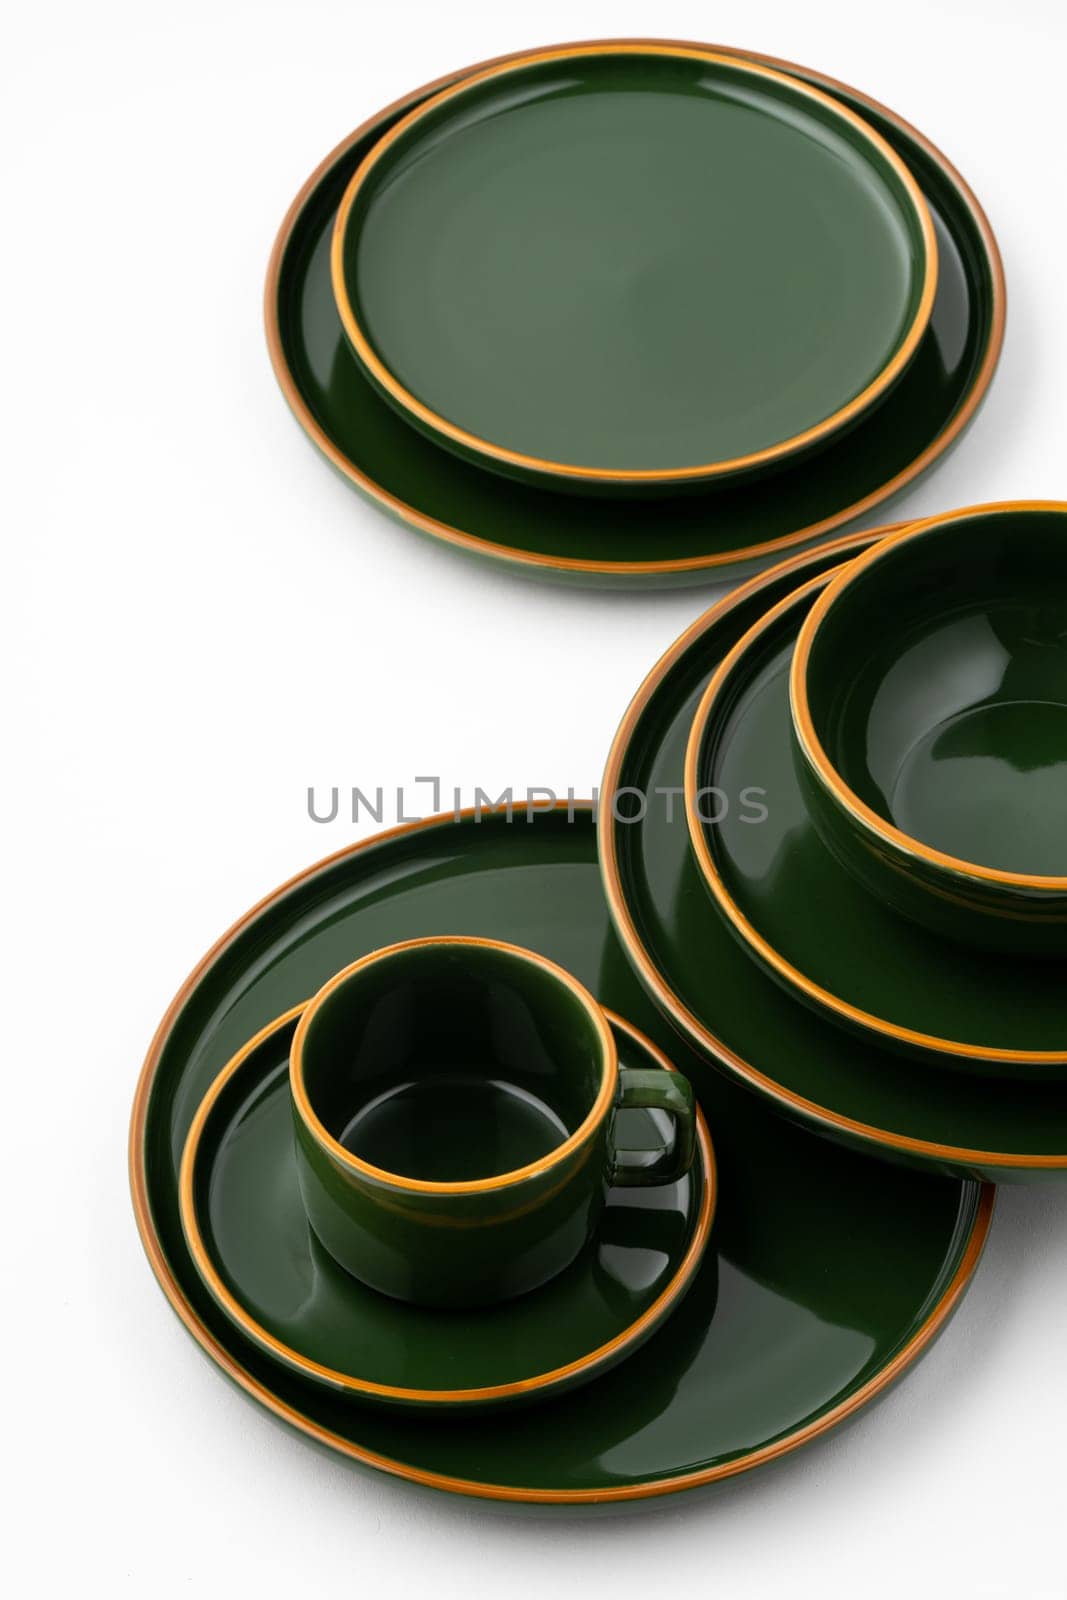 A set of dark green ceramic tableware with orange outlines on a white background by A_Karim